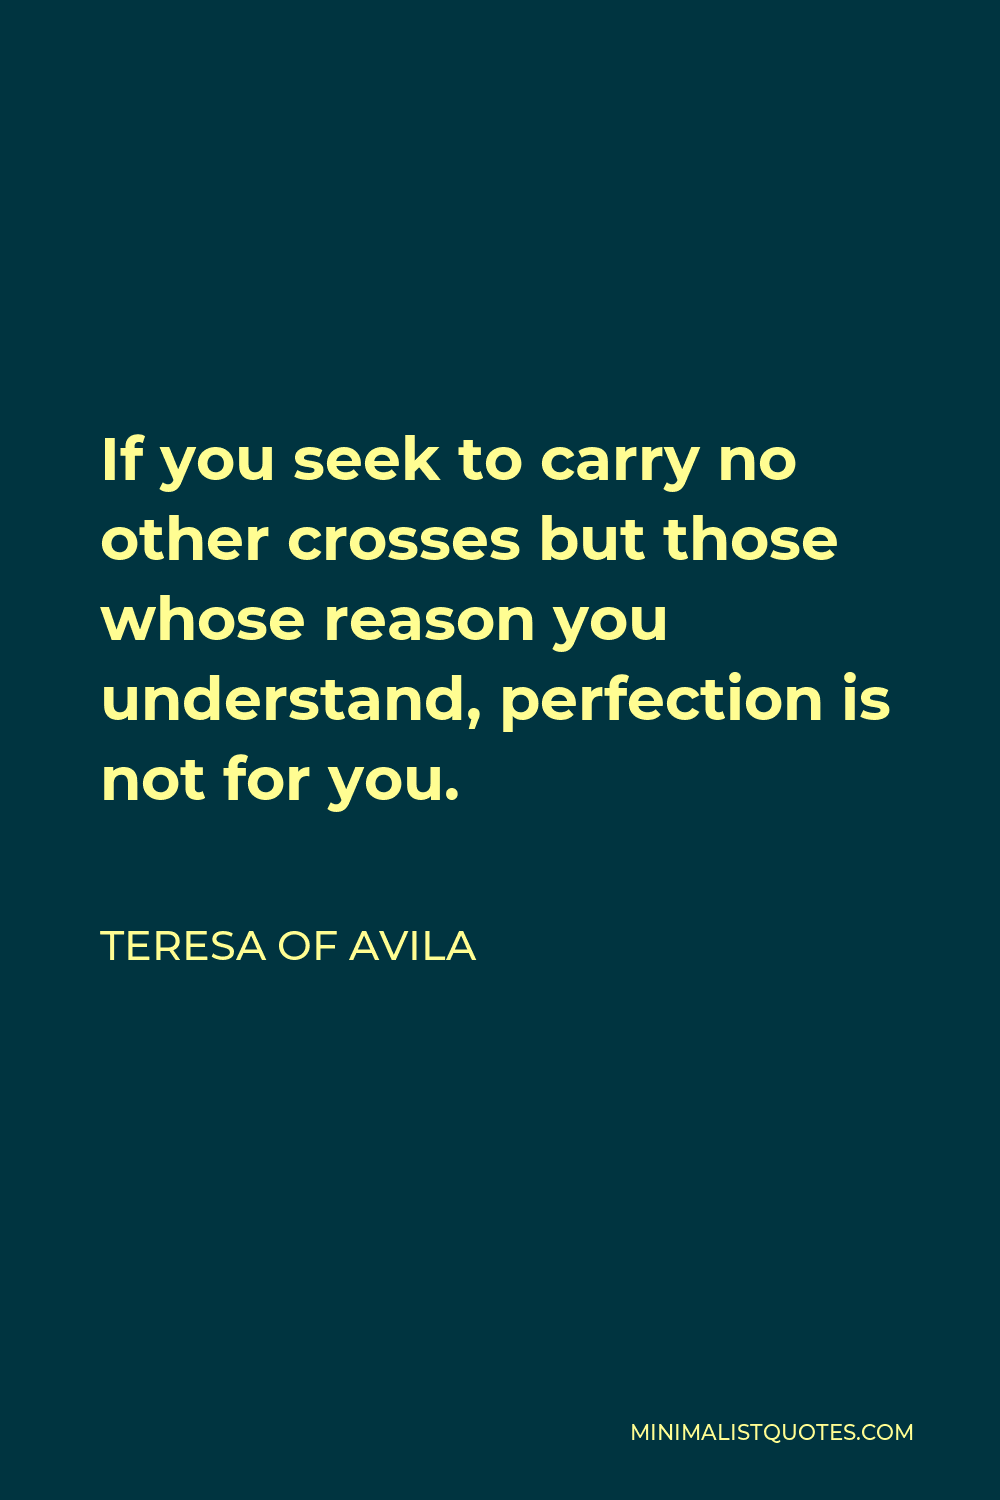 Teresa of Avila Quote - If you seek to carry no other crosses but those whose reason you understand, perfection is not for you.